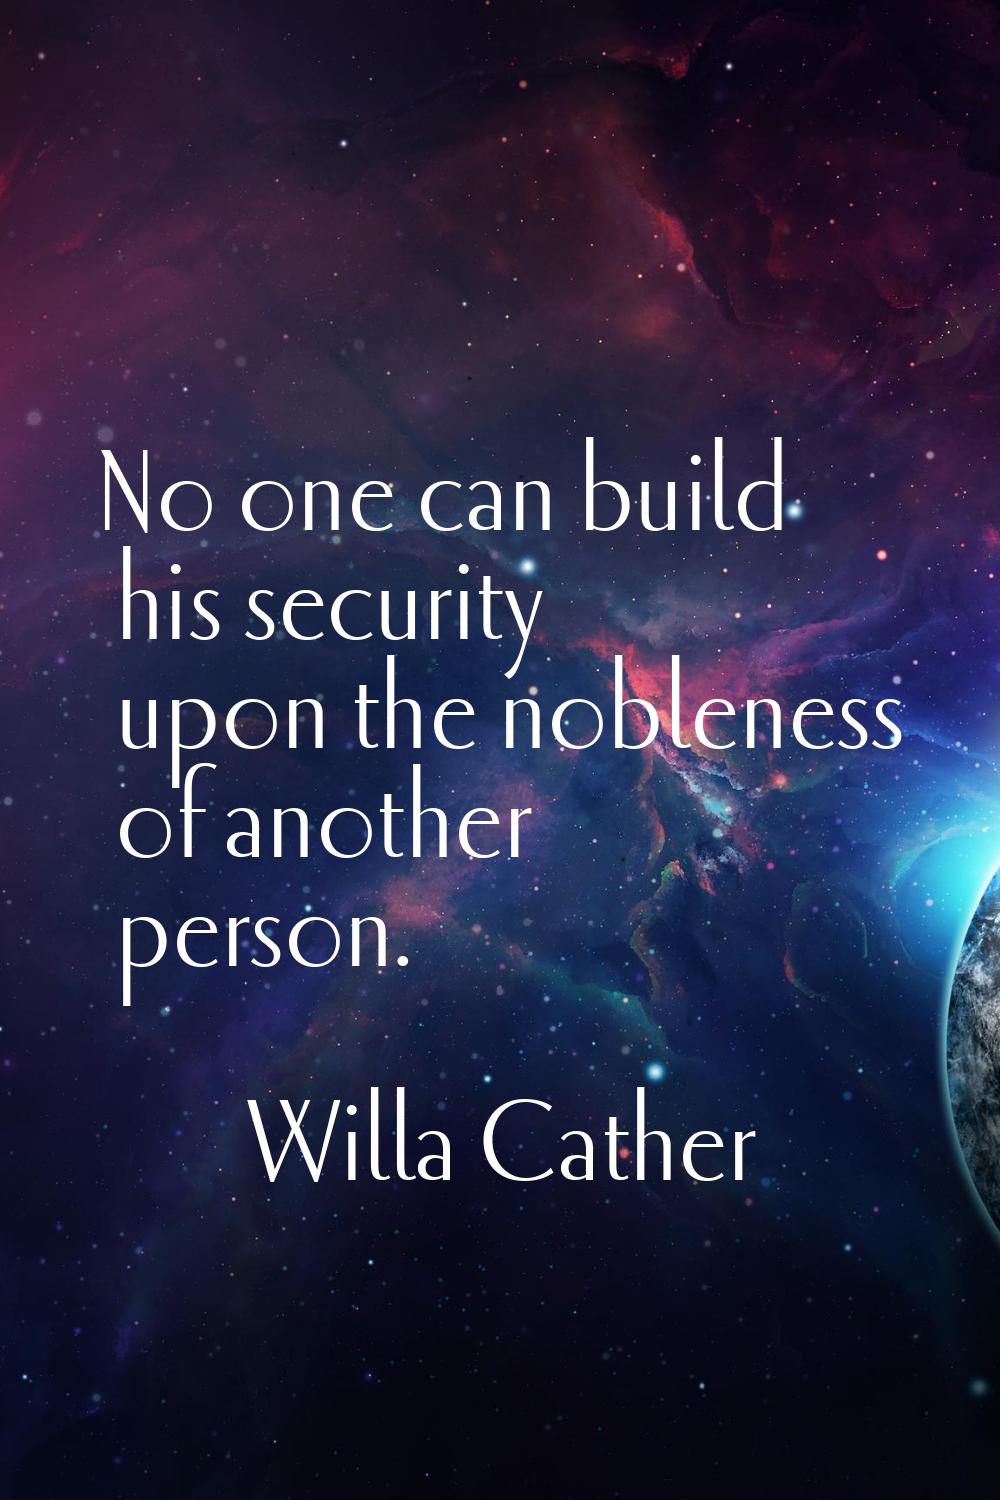 No one can build his security upon the nobleness of another person.